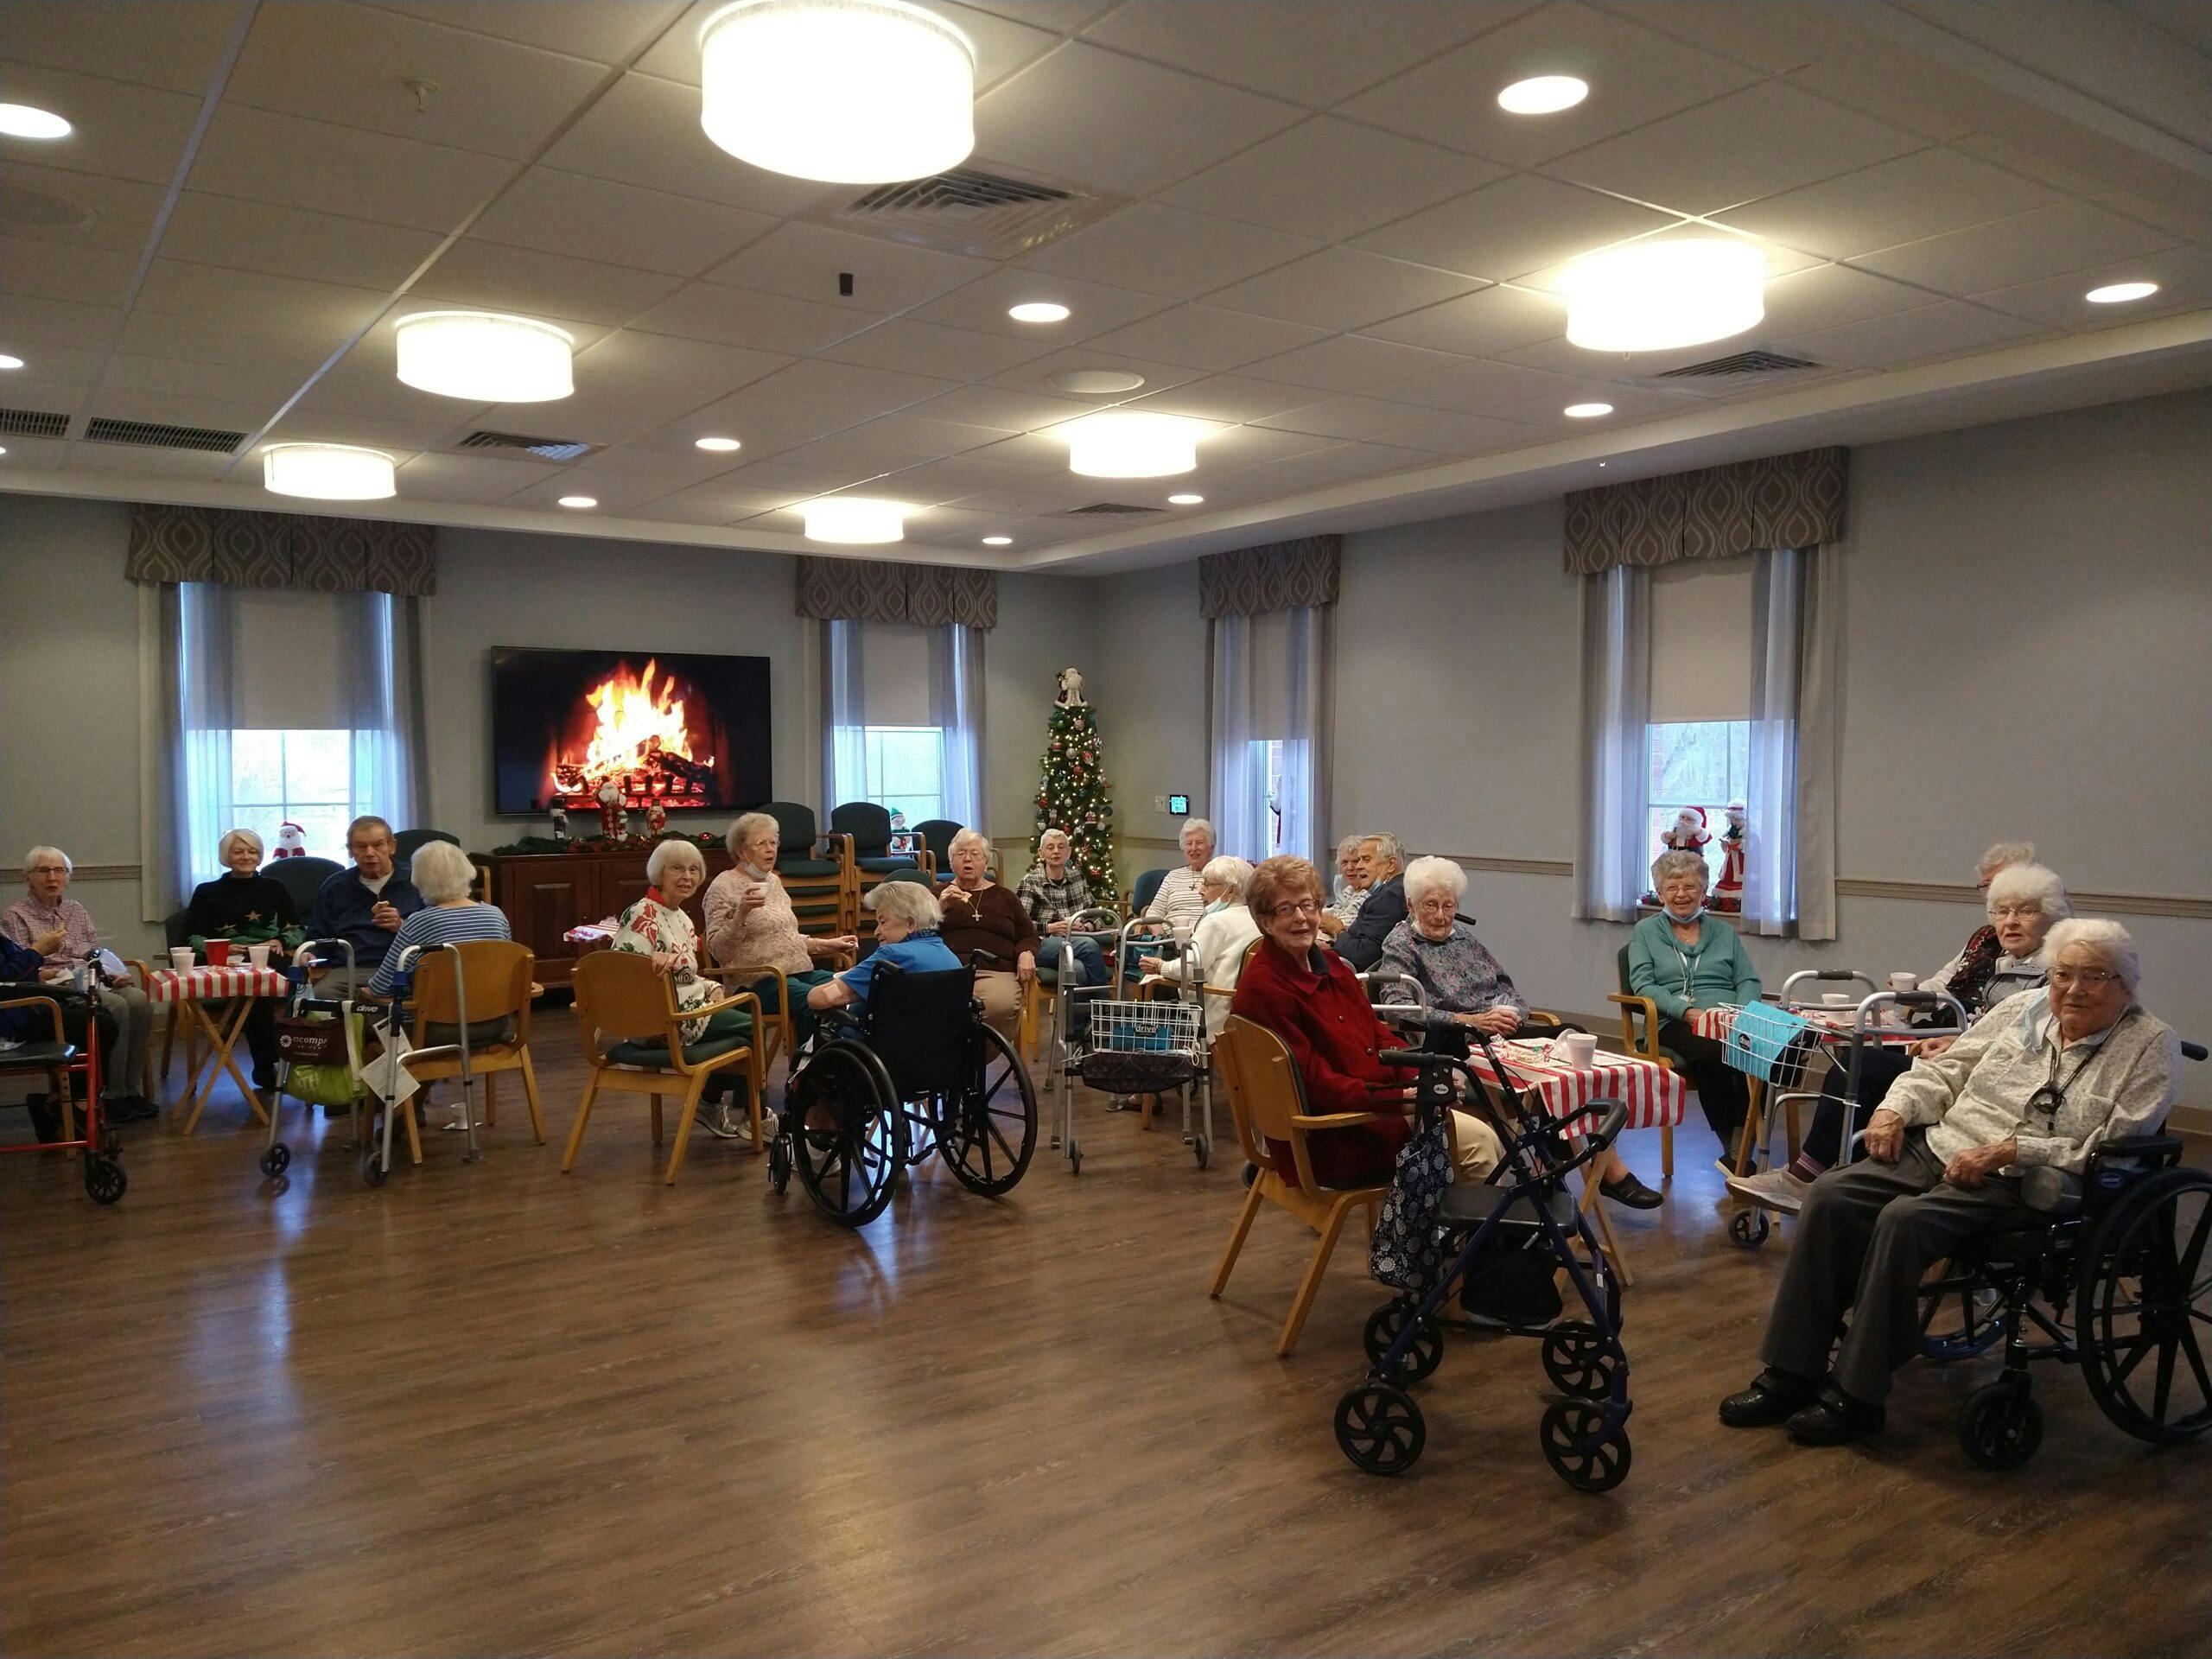 Residents Gather For Post Decorating Festivities